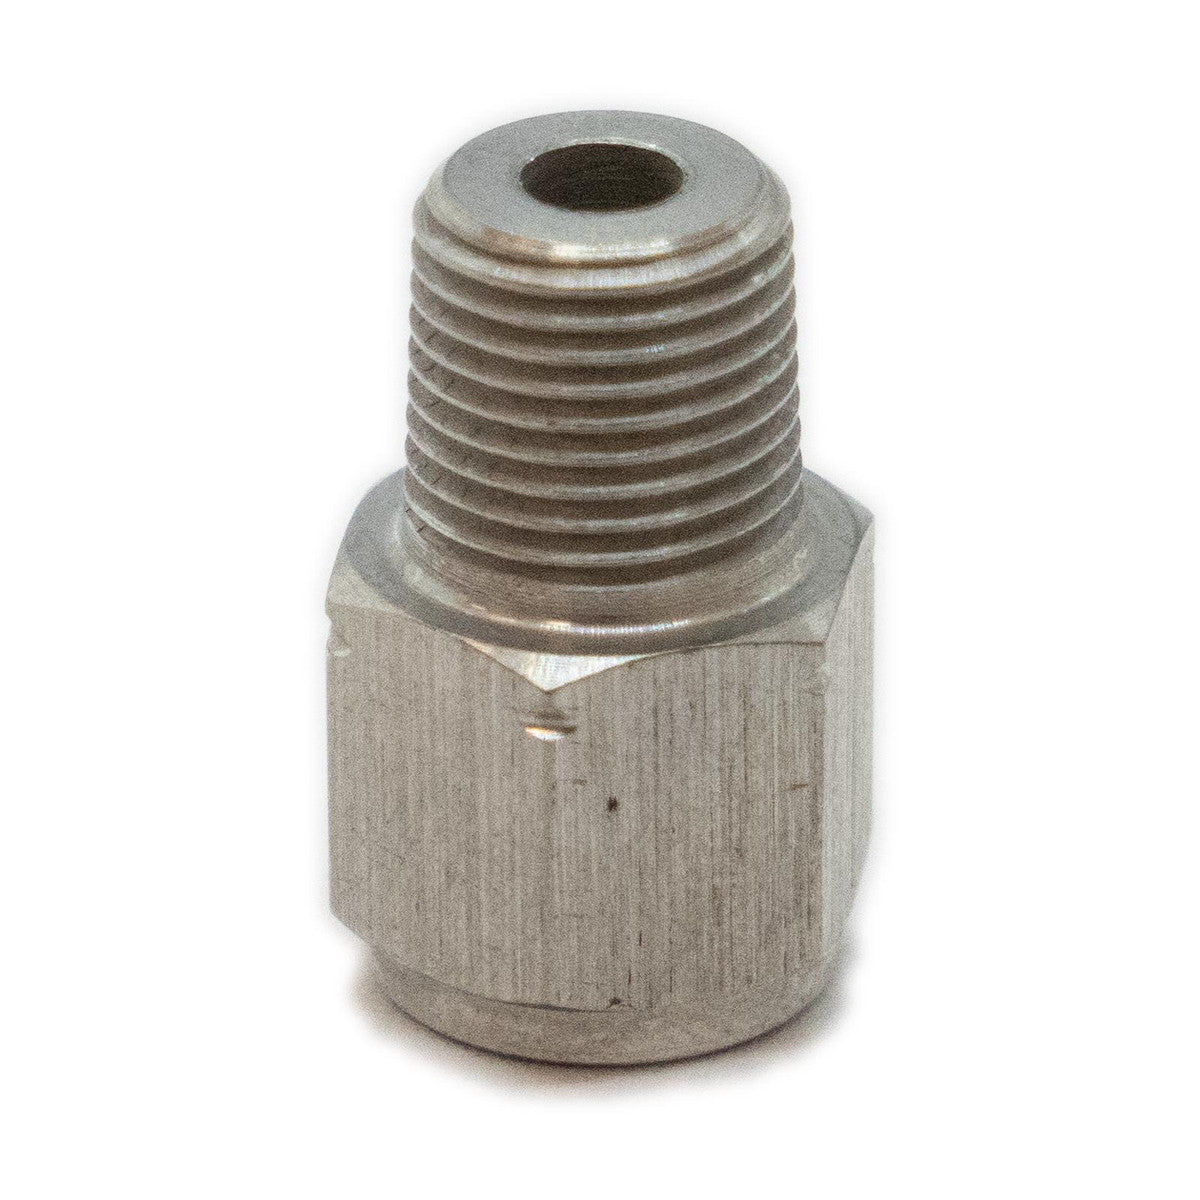 Adapter M10 x 1 Female to 1/8 BSP Male - Stainless Steel